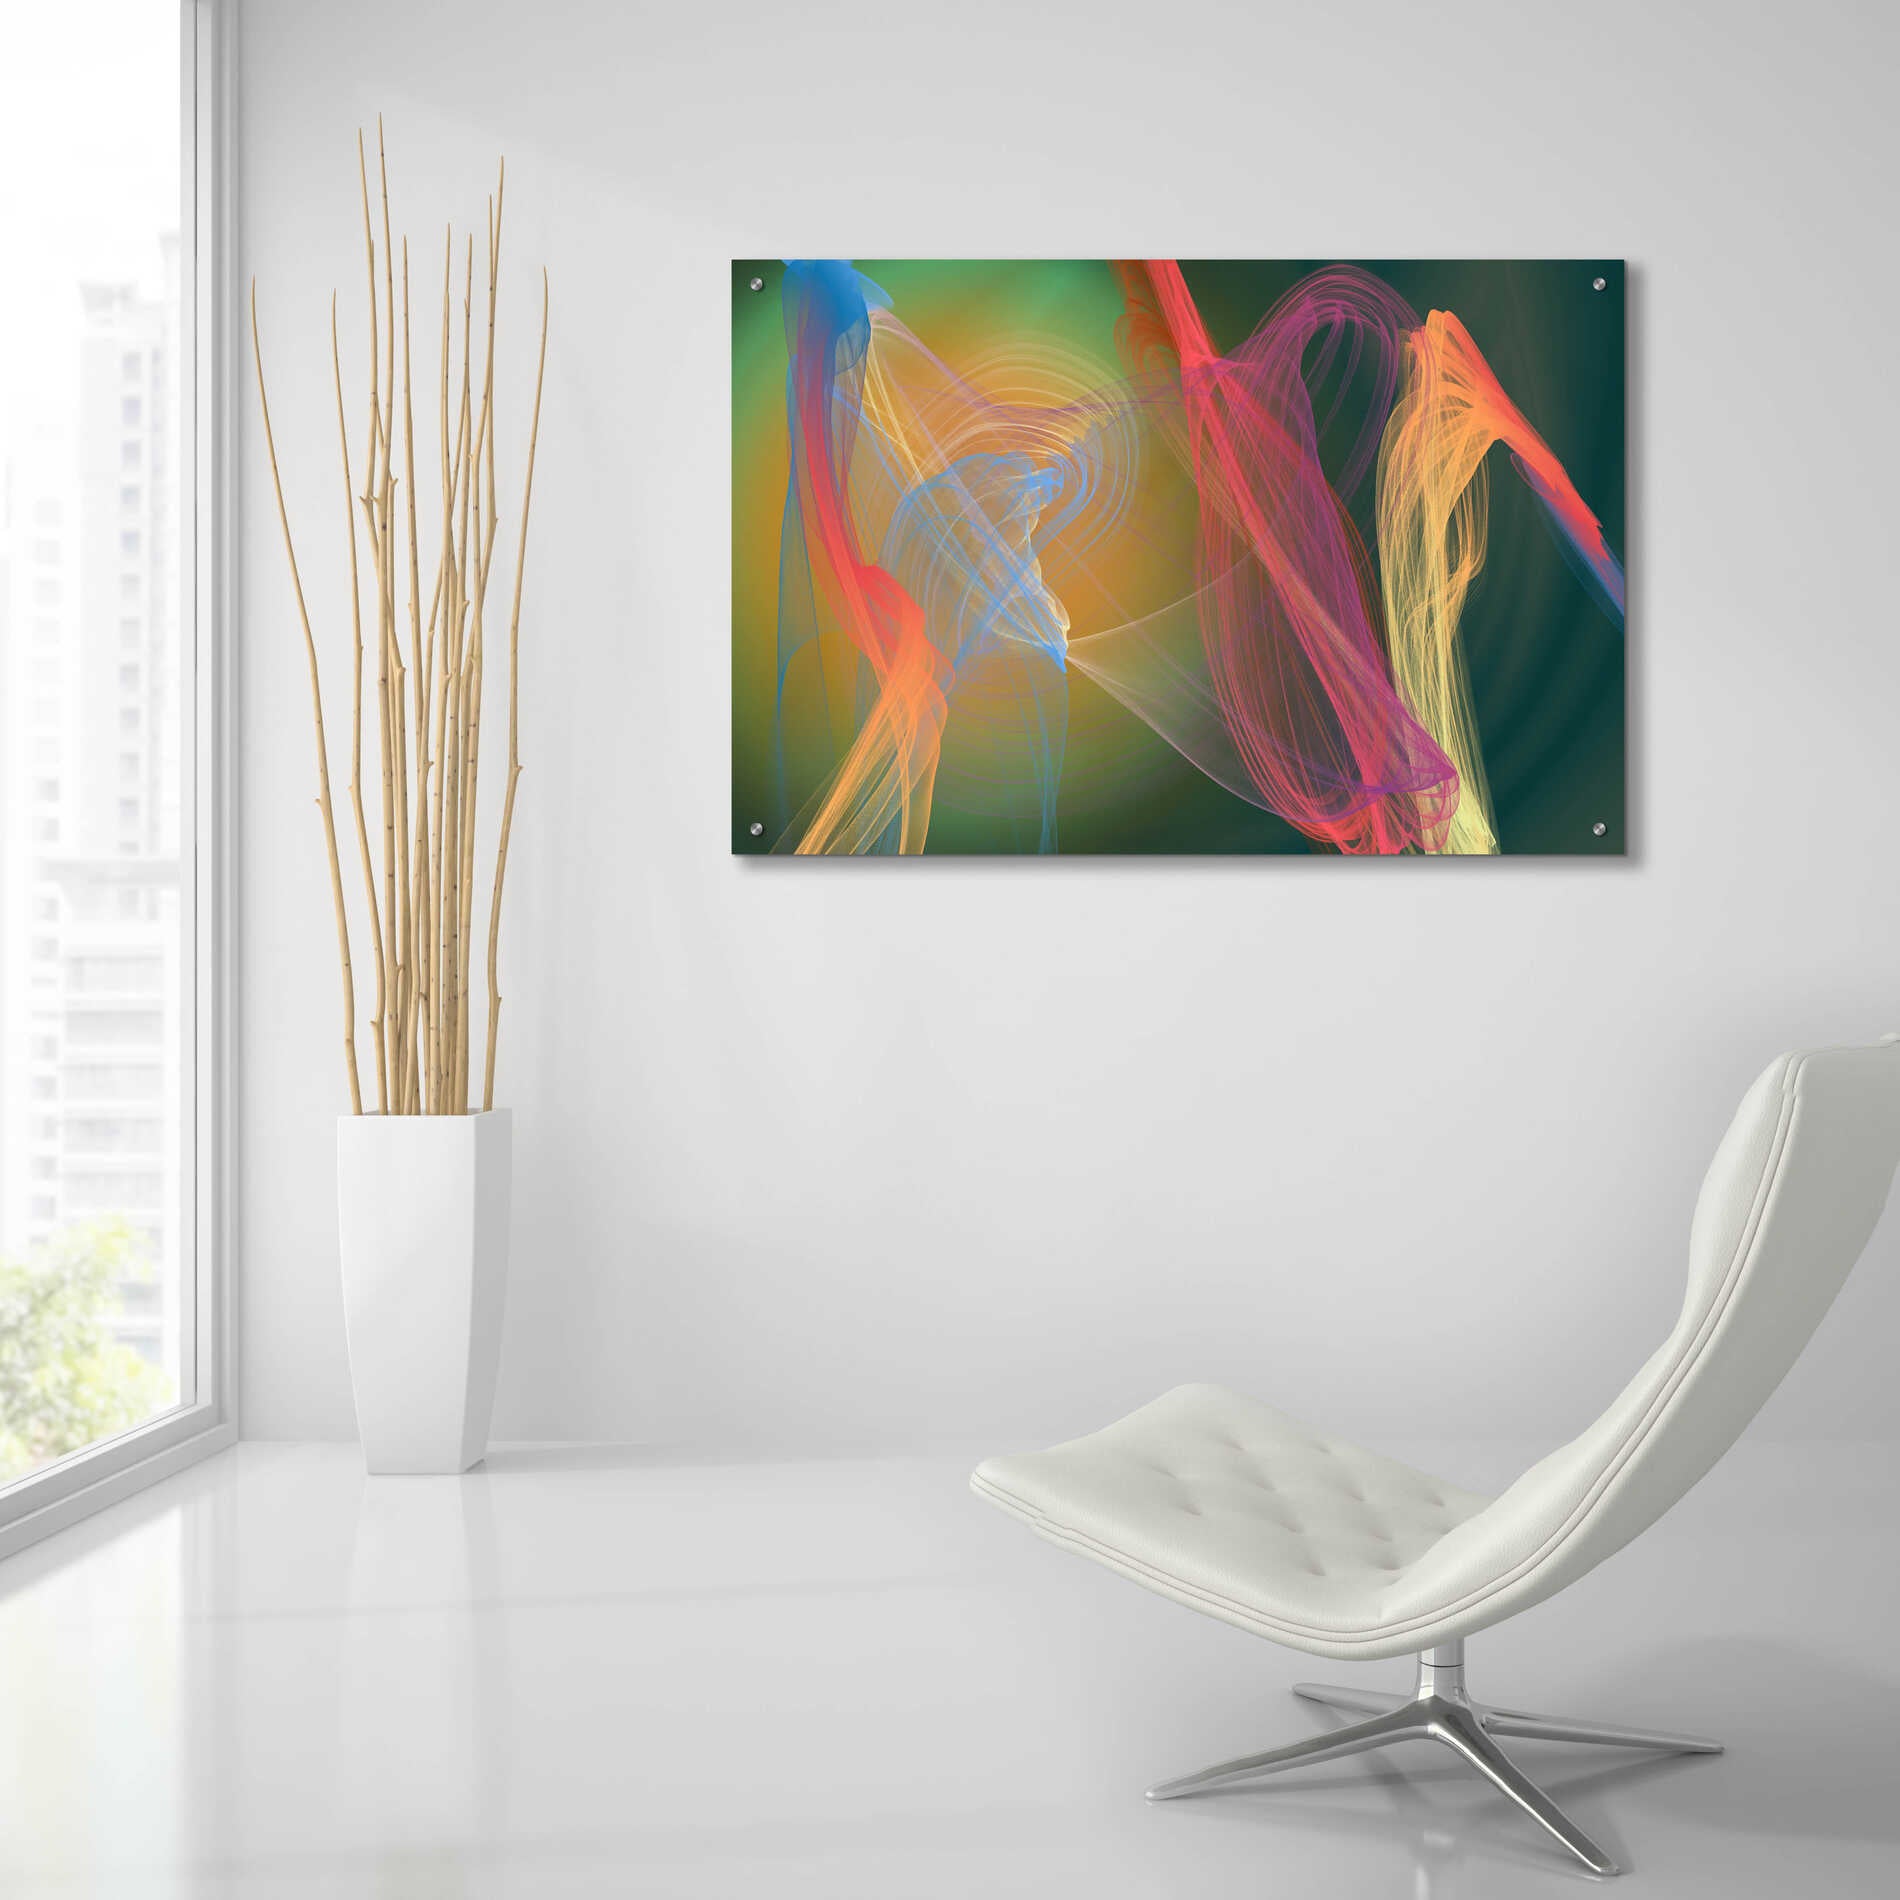 Epic Art 'Inverted Color In The Lines 9' by Irena Orlov Acrylic Glass Wall Art,36x24